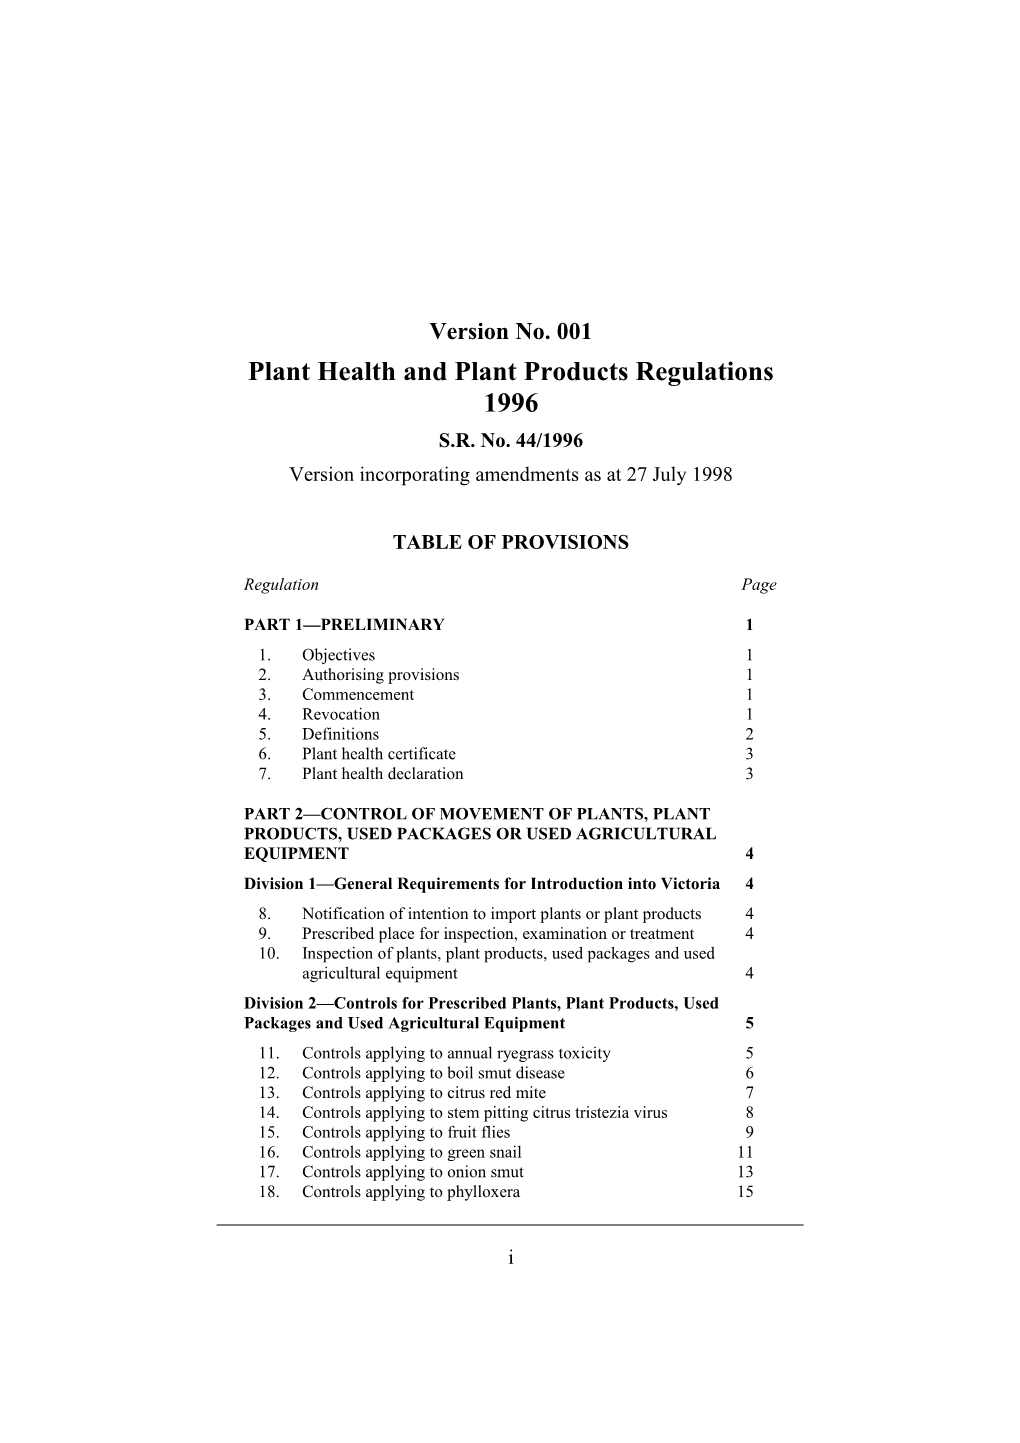 Plant Health and Plant Products Regulations 1996